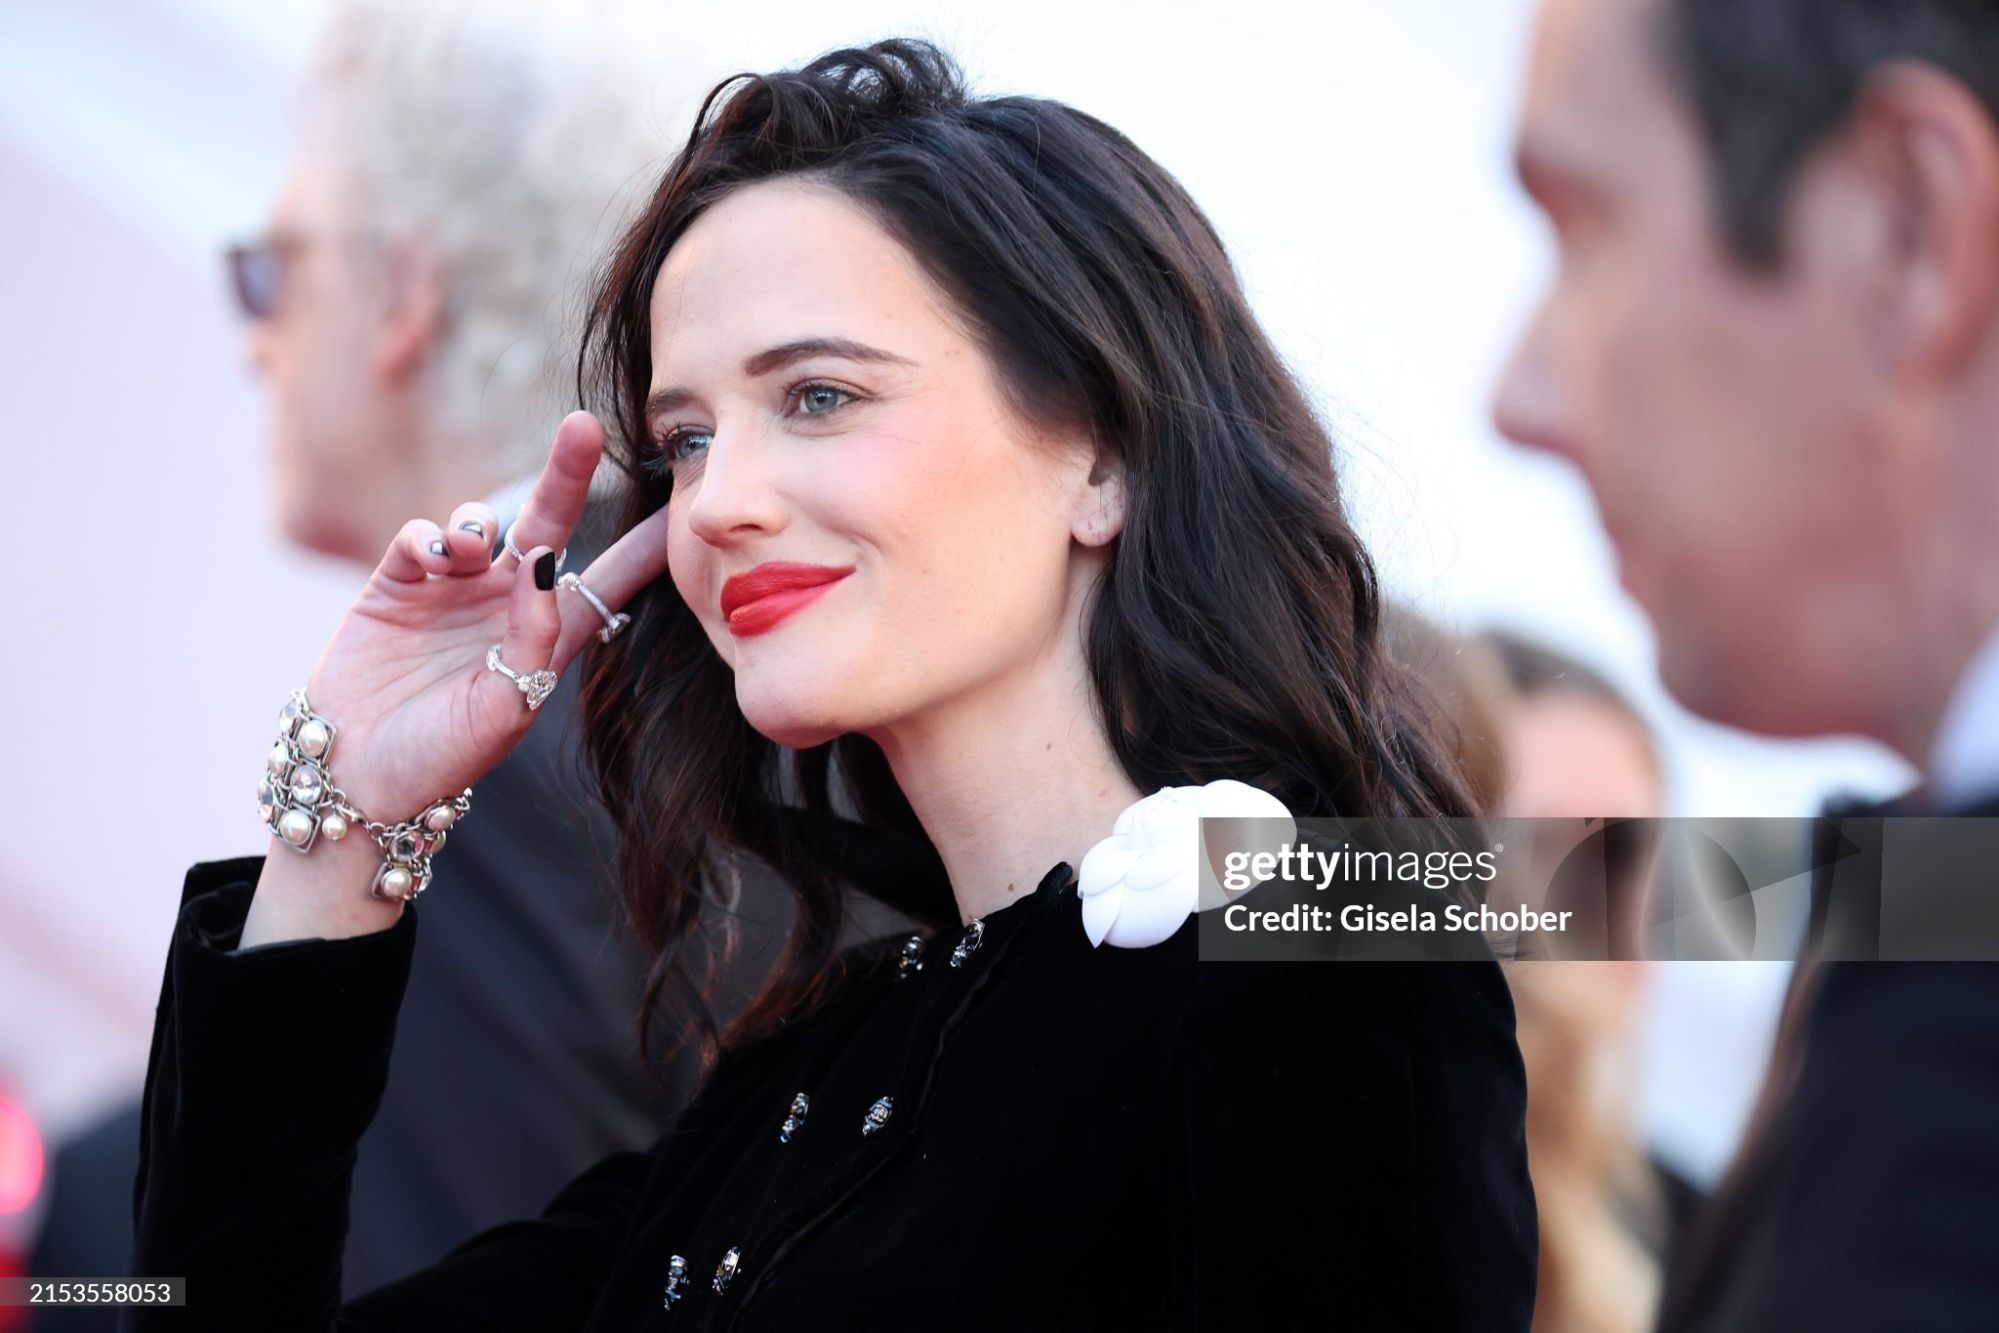 gettyimages-2153558053-2048x2048.jpg